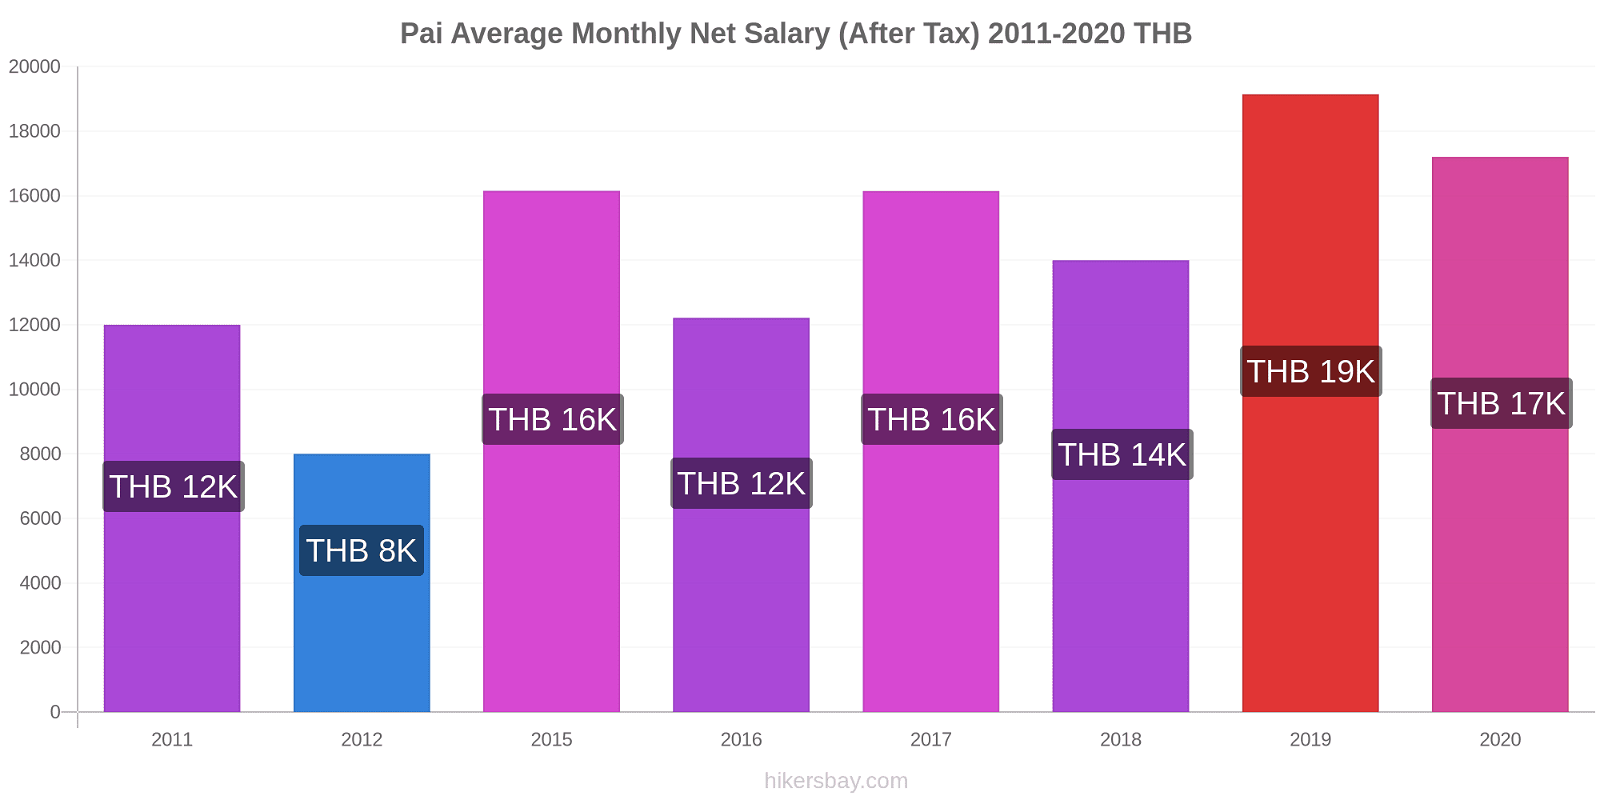 Pai price changes Average Monthly Net Salary (After Tax) hikersbay.com